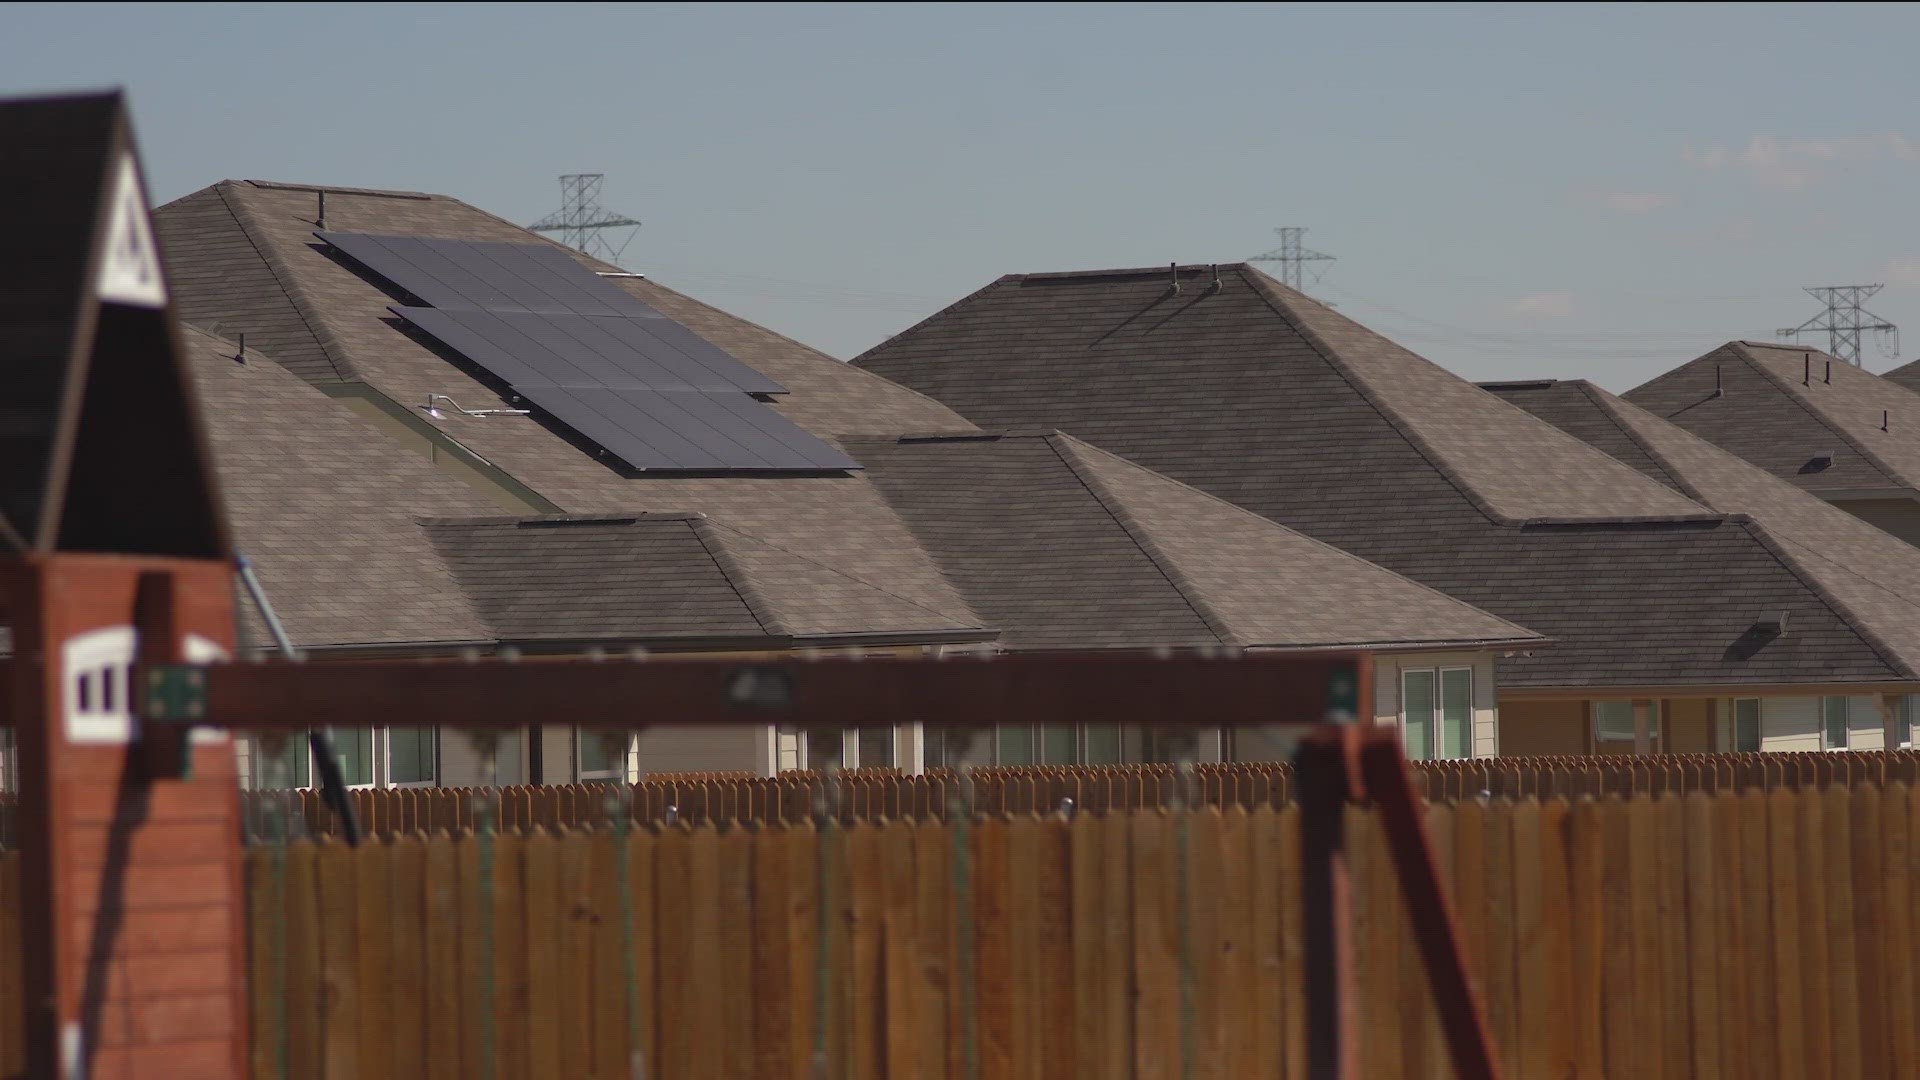 Three years after a deadly winter storm, many Texans are still looking to strengthen their own electricity supply. But beware before you buy solar panels.